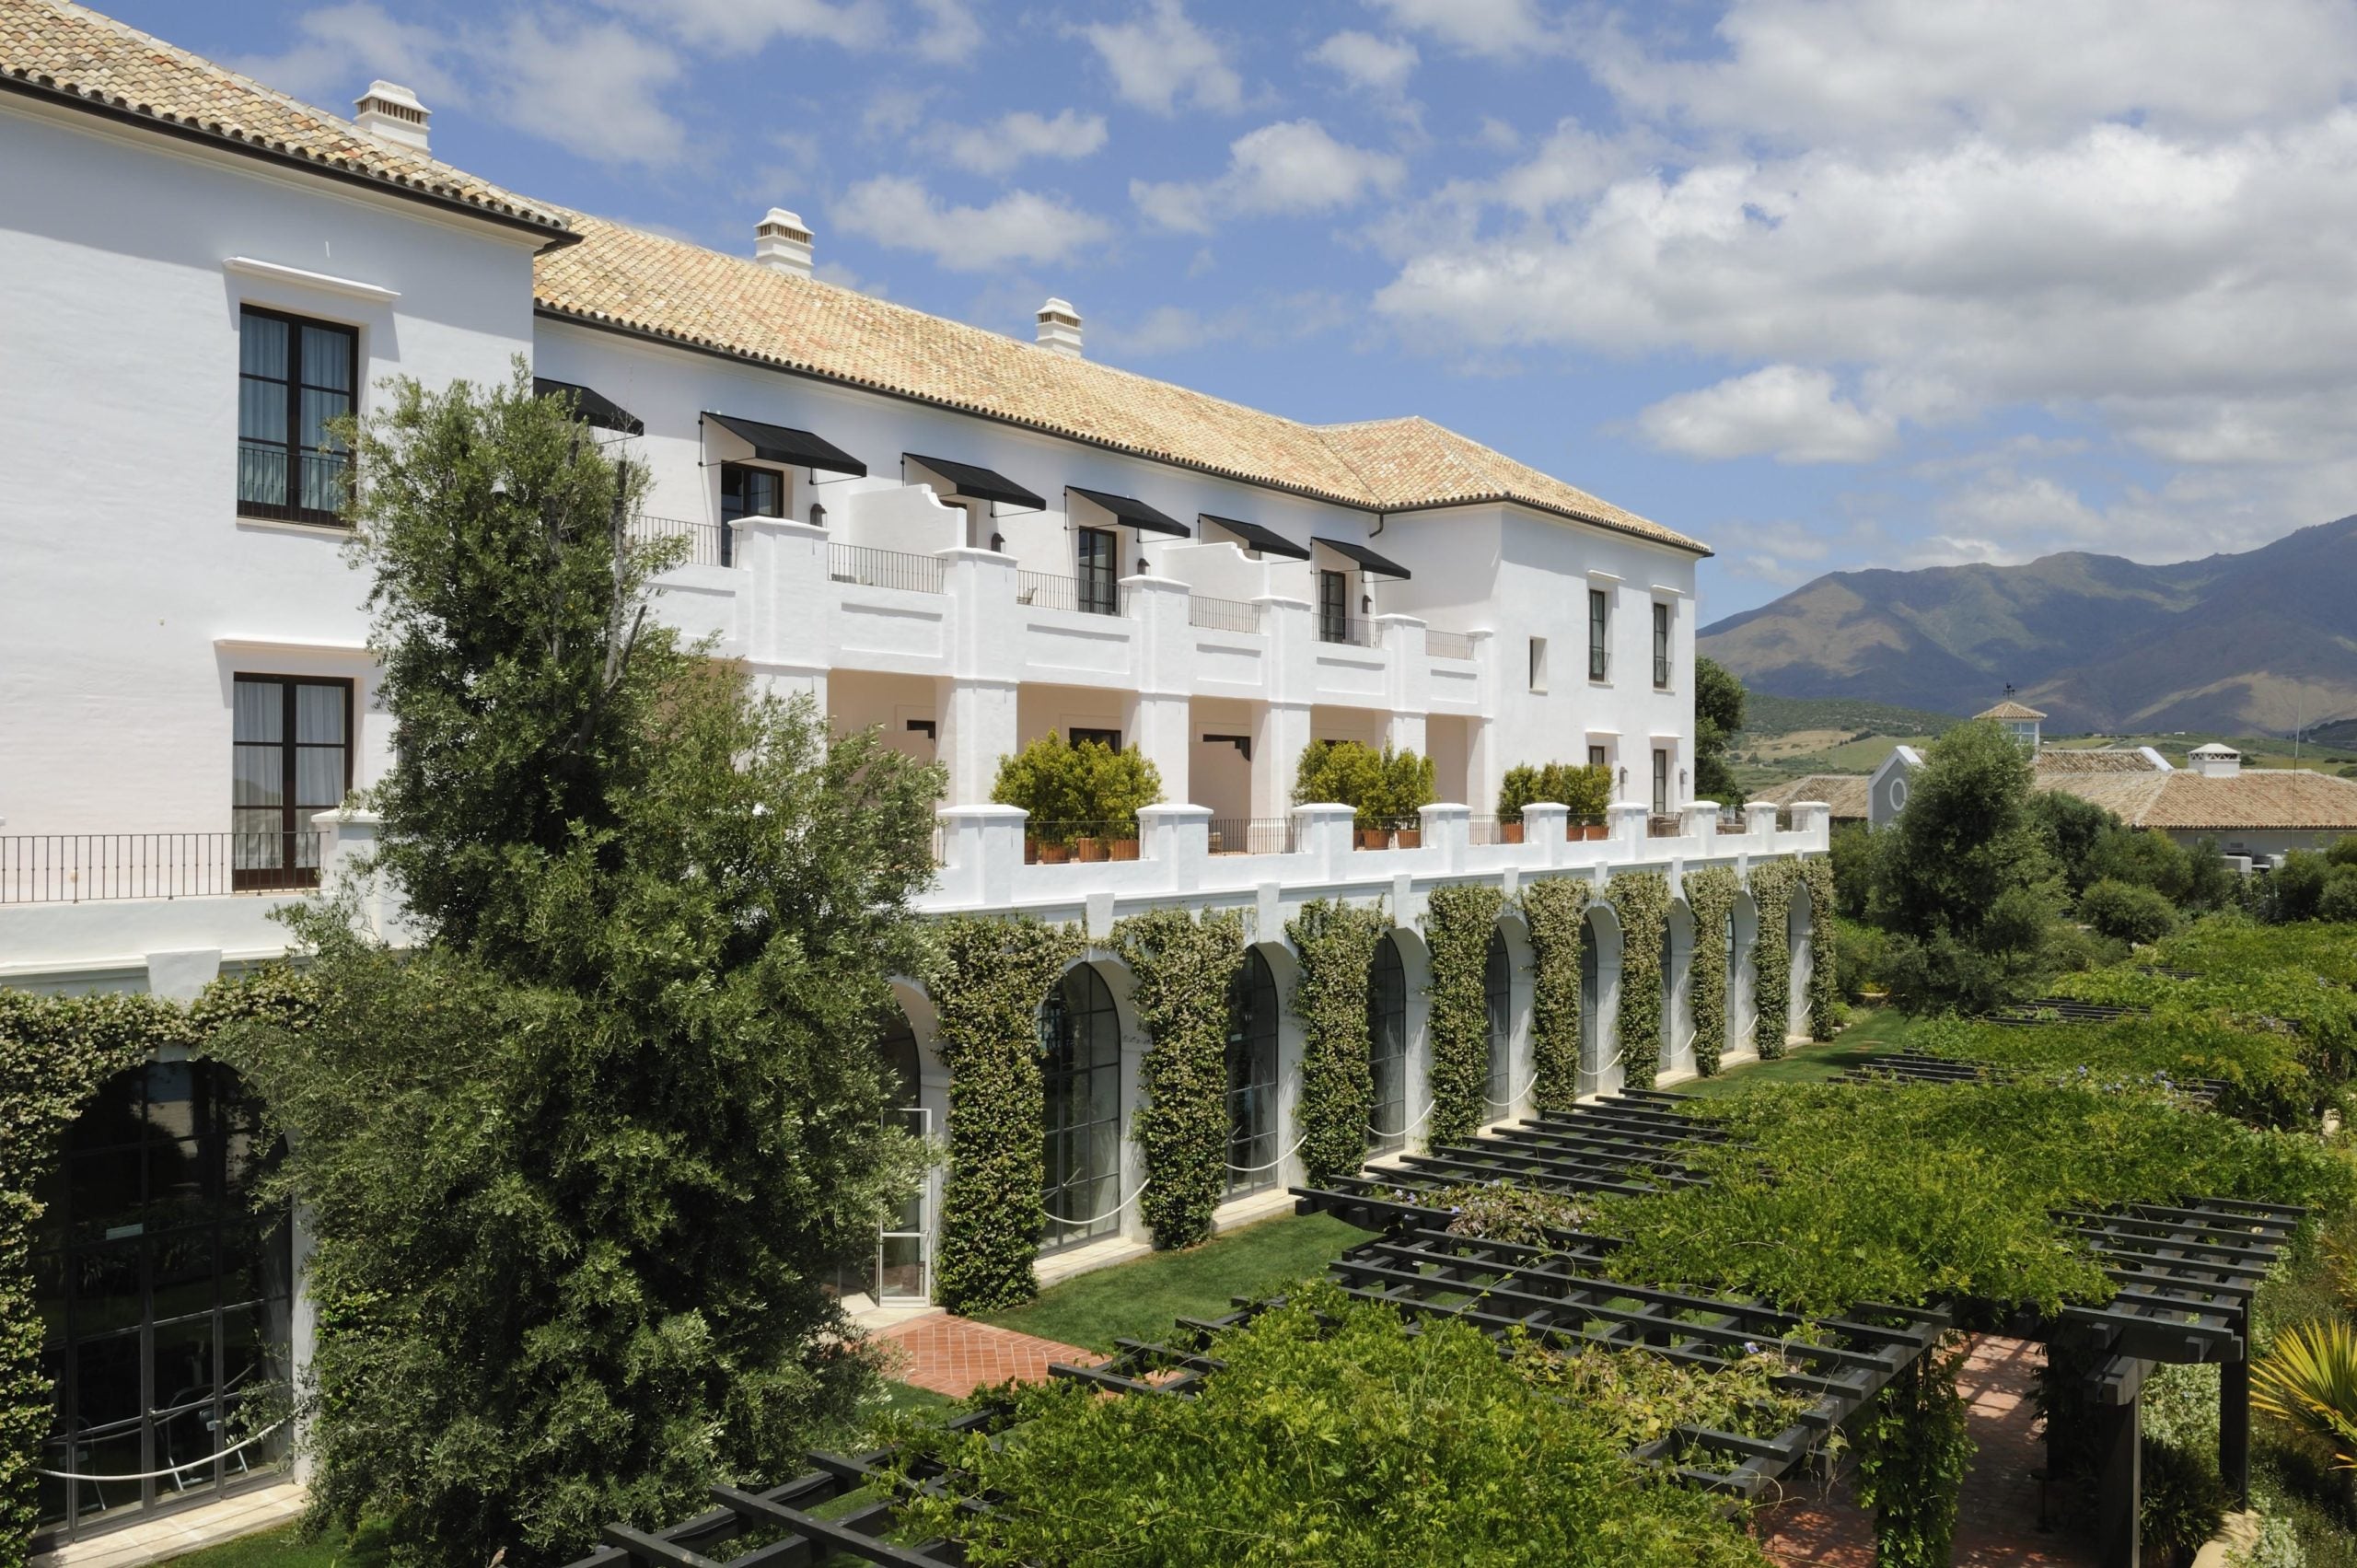 The Best Luxury Hotels for Social Distancing in Spain